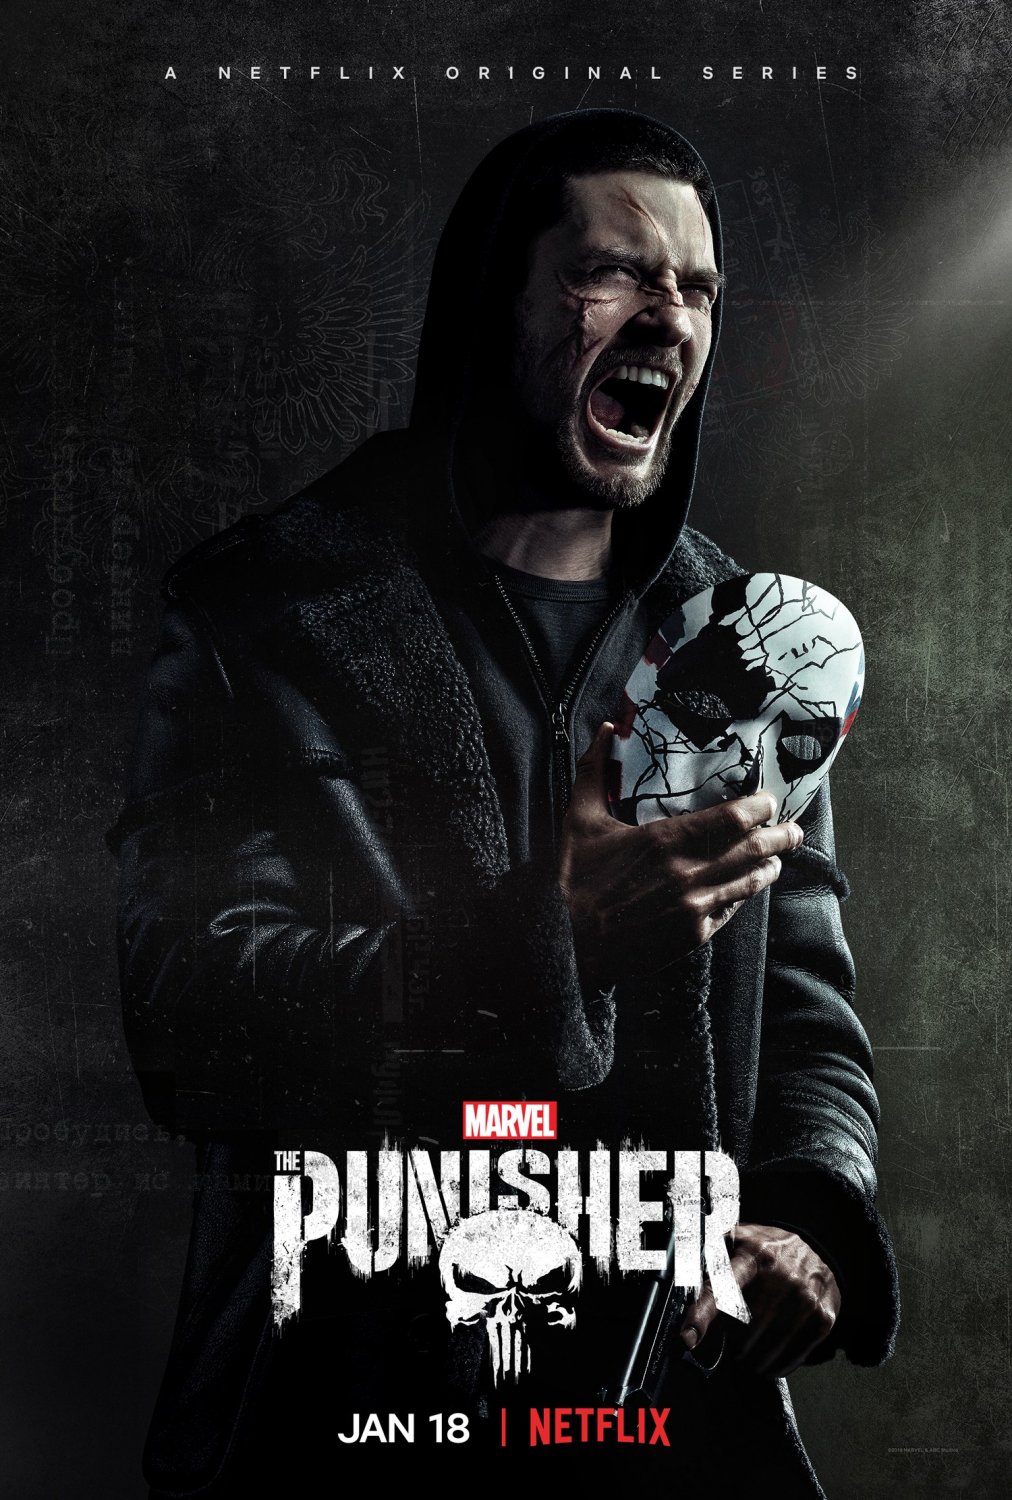 The Punisher Season 2  13"x19" (32cm/49cm) Polyester Fabric Poster